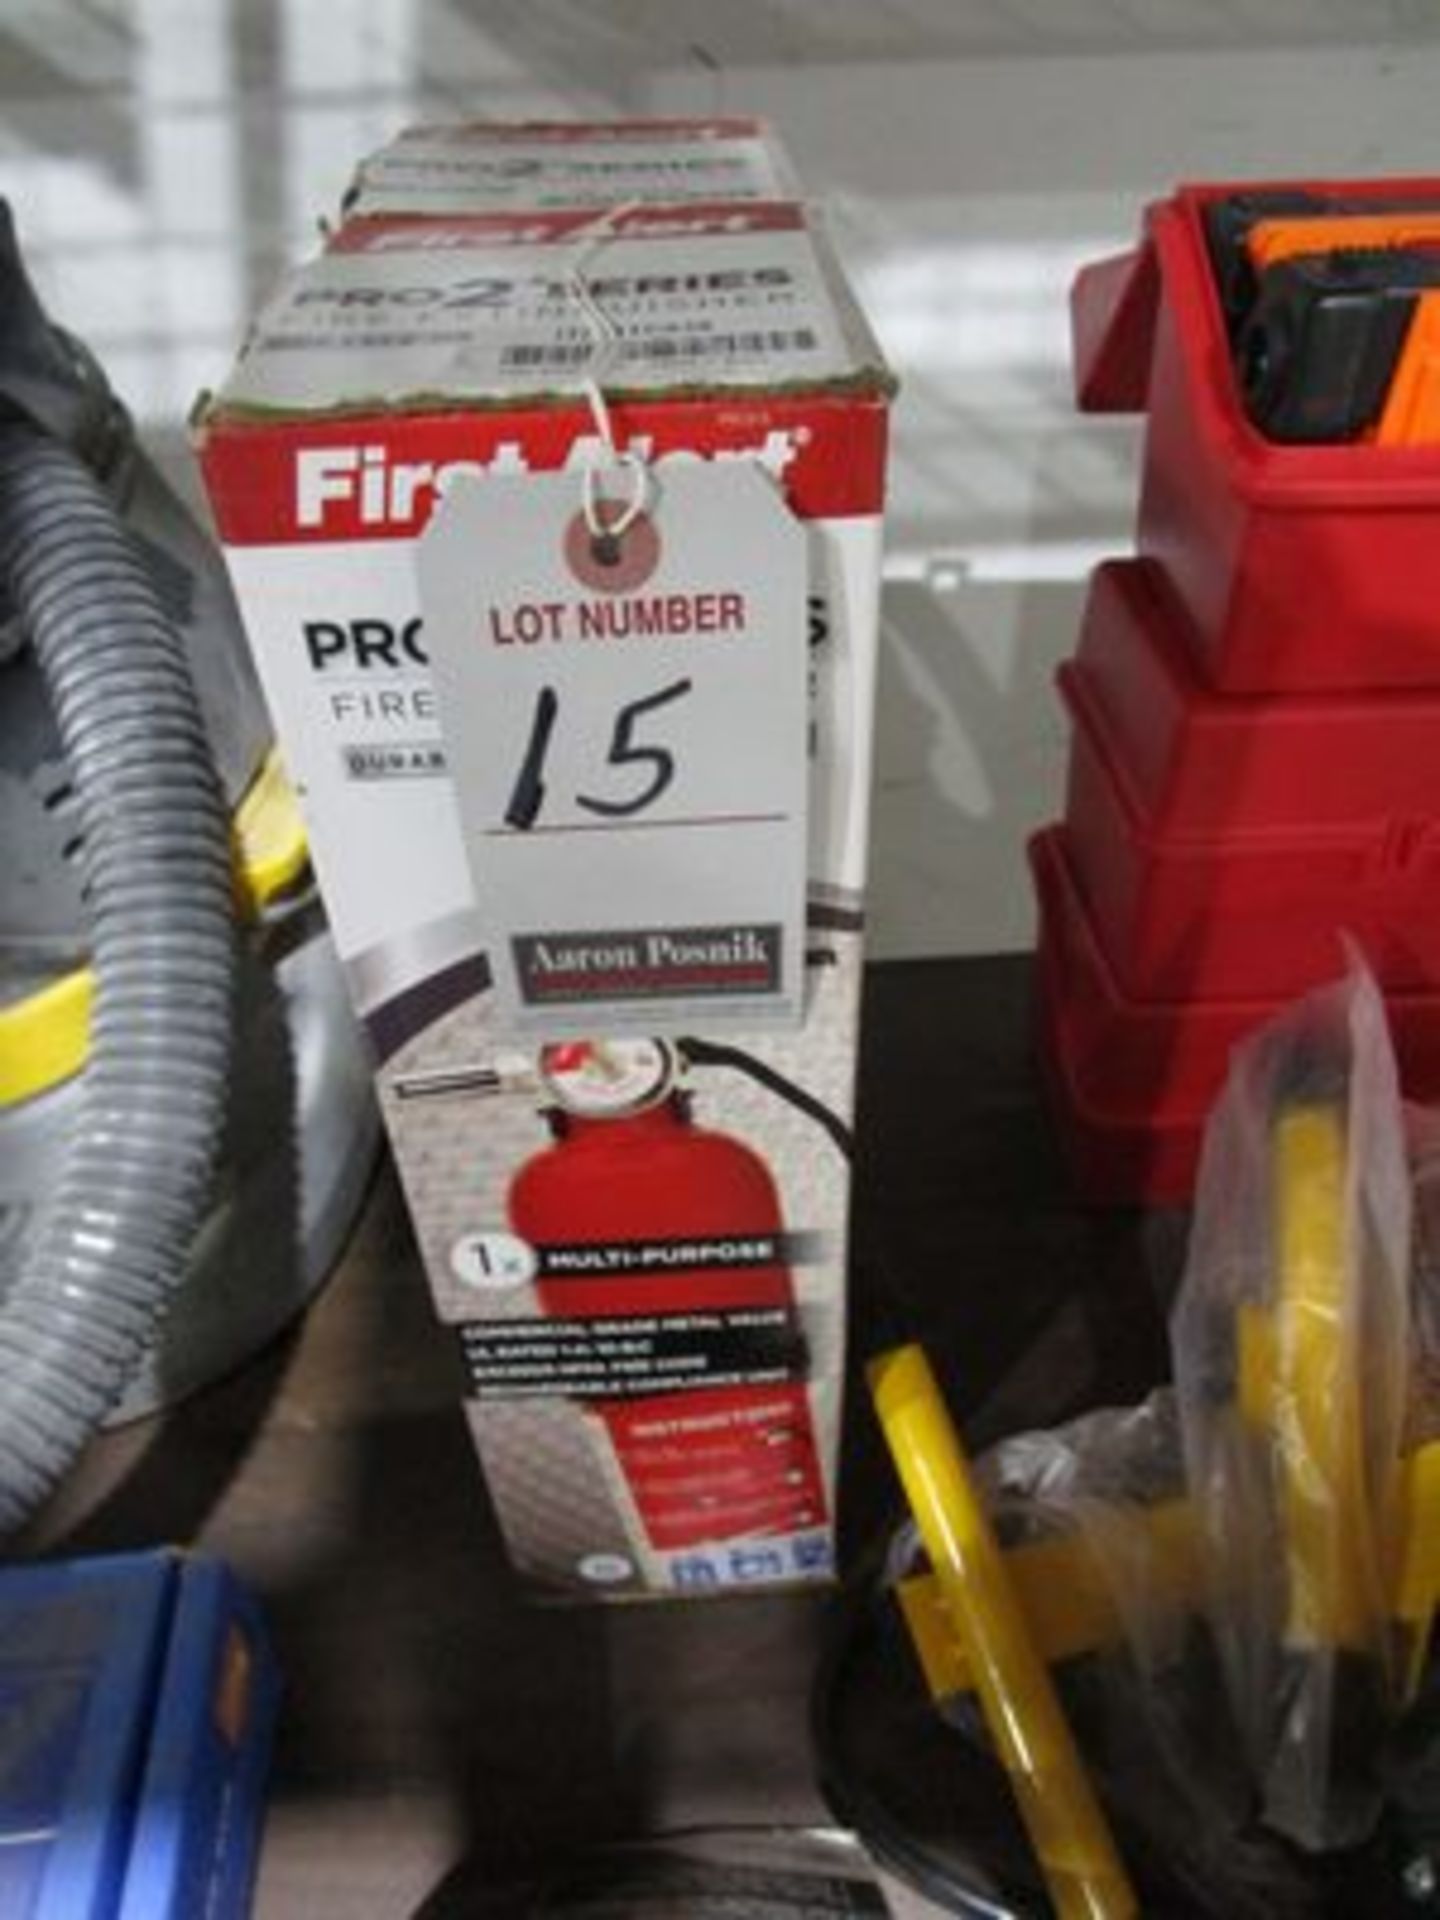 FIRST ALERT DRY CHEMICAL FIRE EXTINGUISHERS